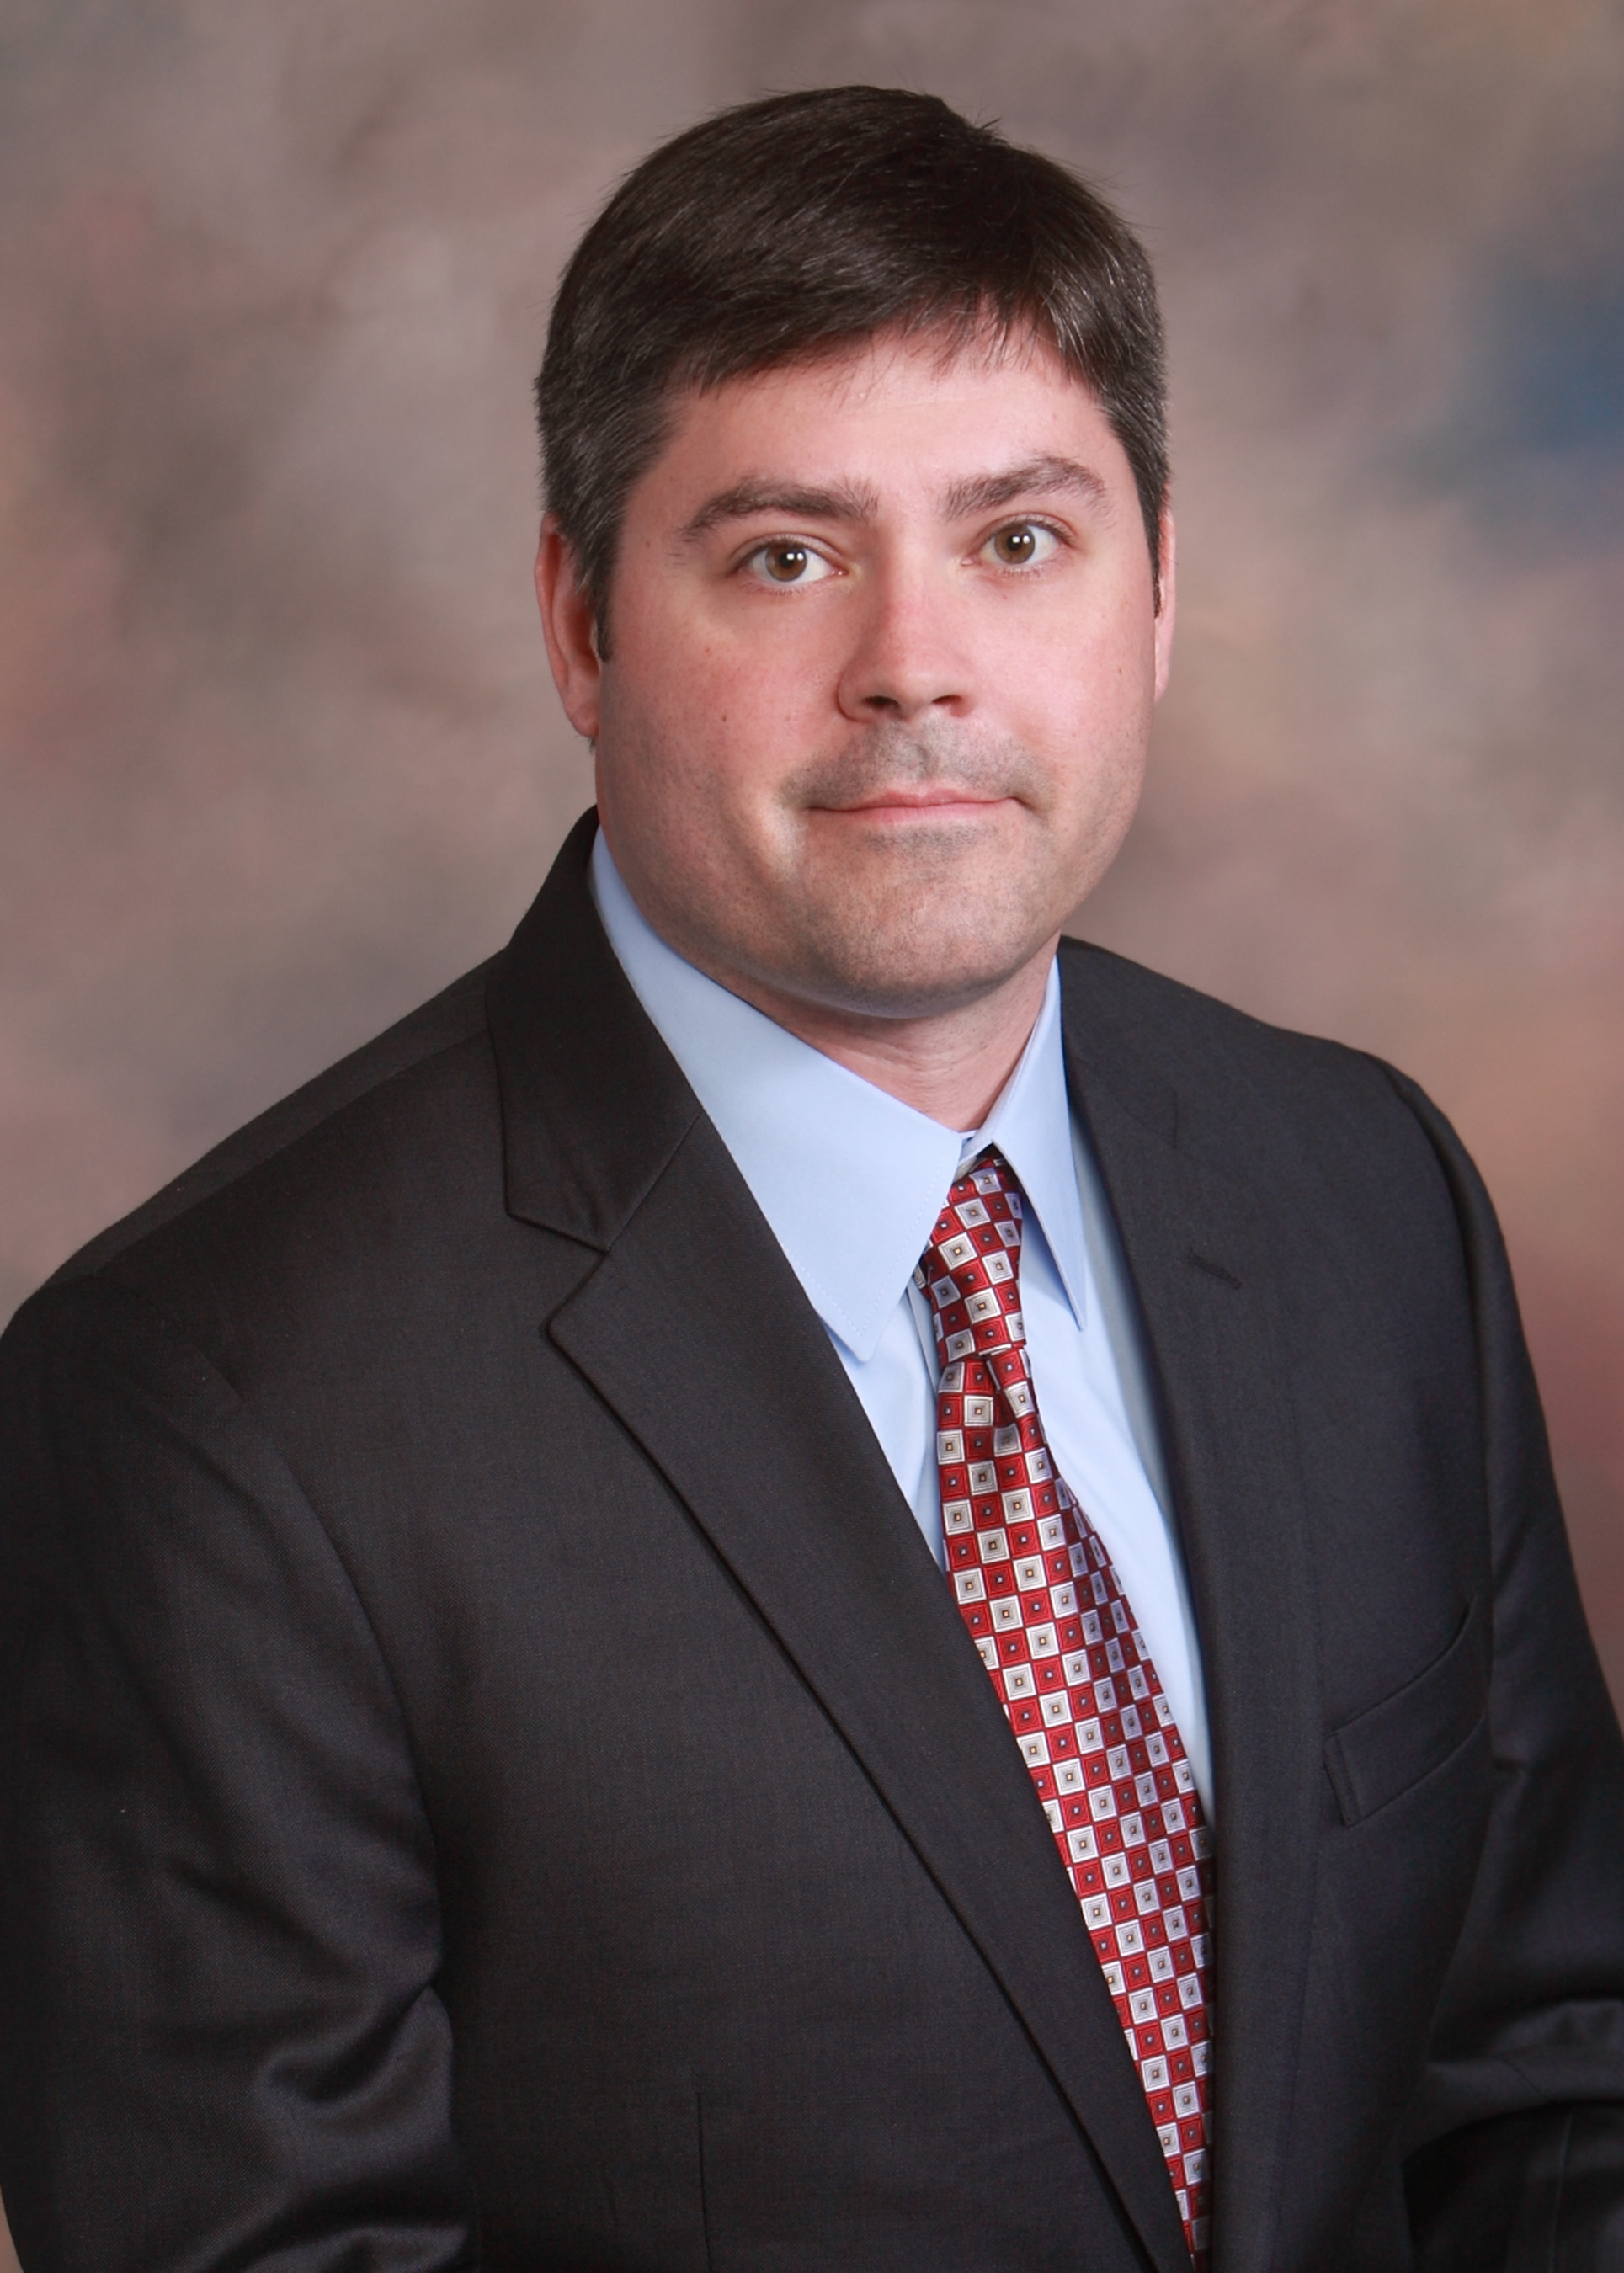 Joshua T. Montler, president, chief financial officer, and chief operating officer, Lee Industries, effective May 1.